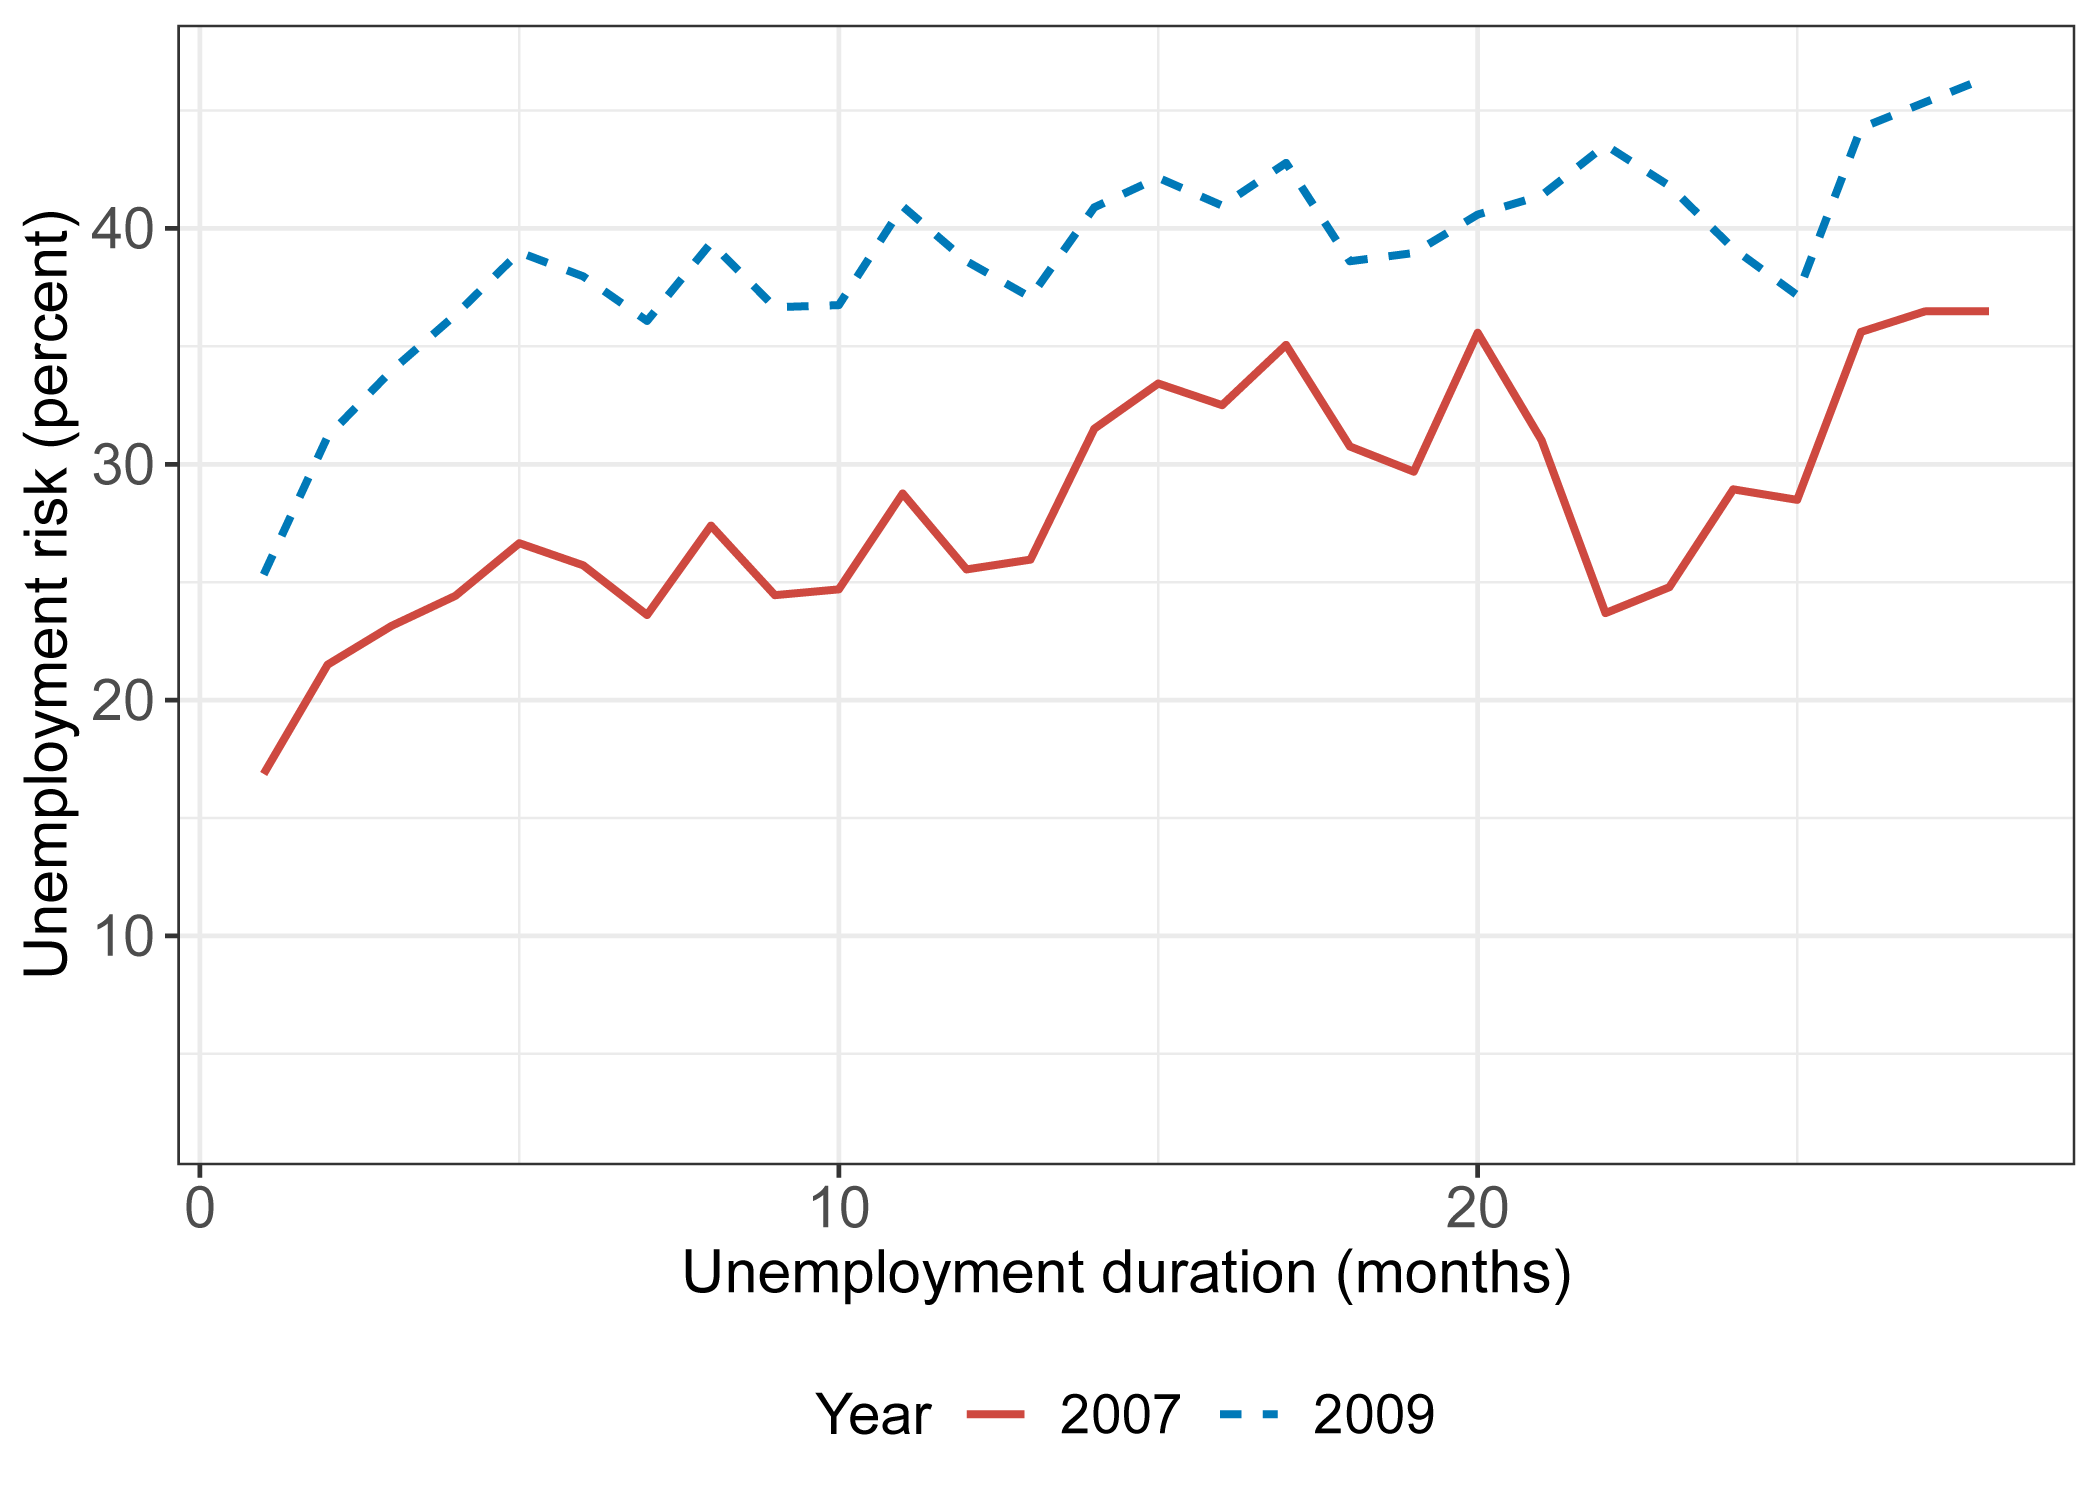 Figure 2. Duration dependence in unemployment risk. See accessible link for data.